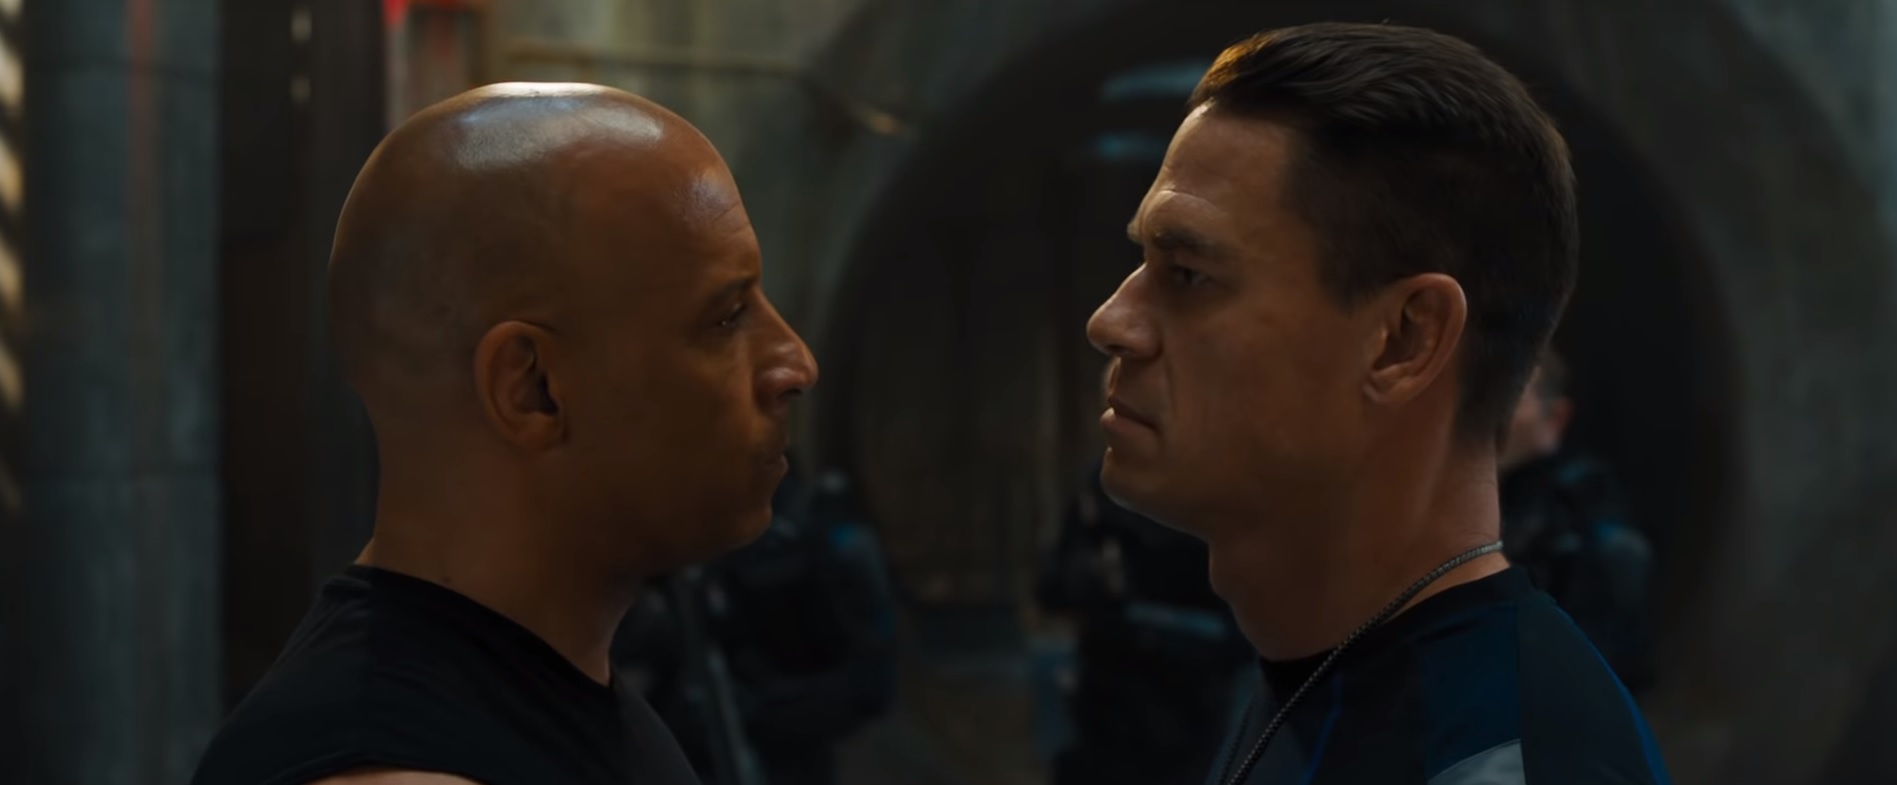 Fast & Furious 9 Trailer: Ghosts, Blood Feuds and Flying Cars